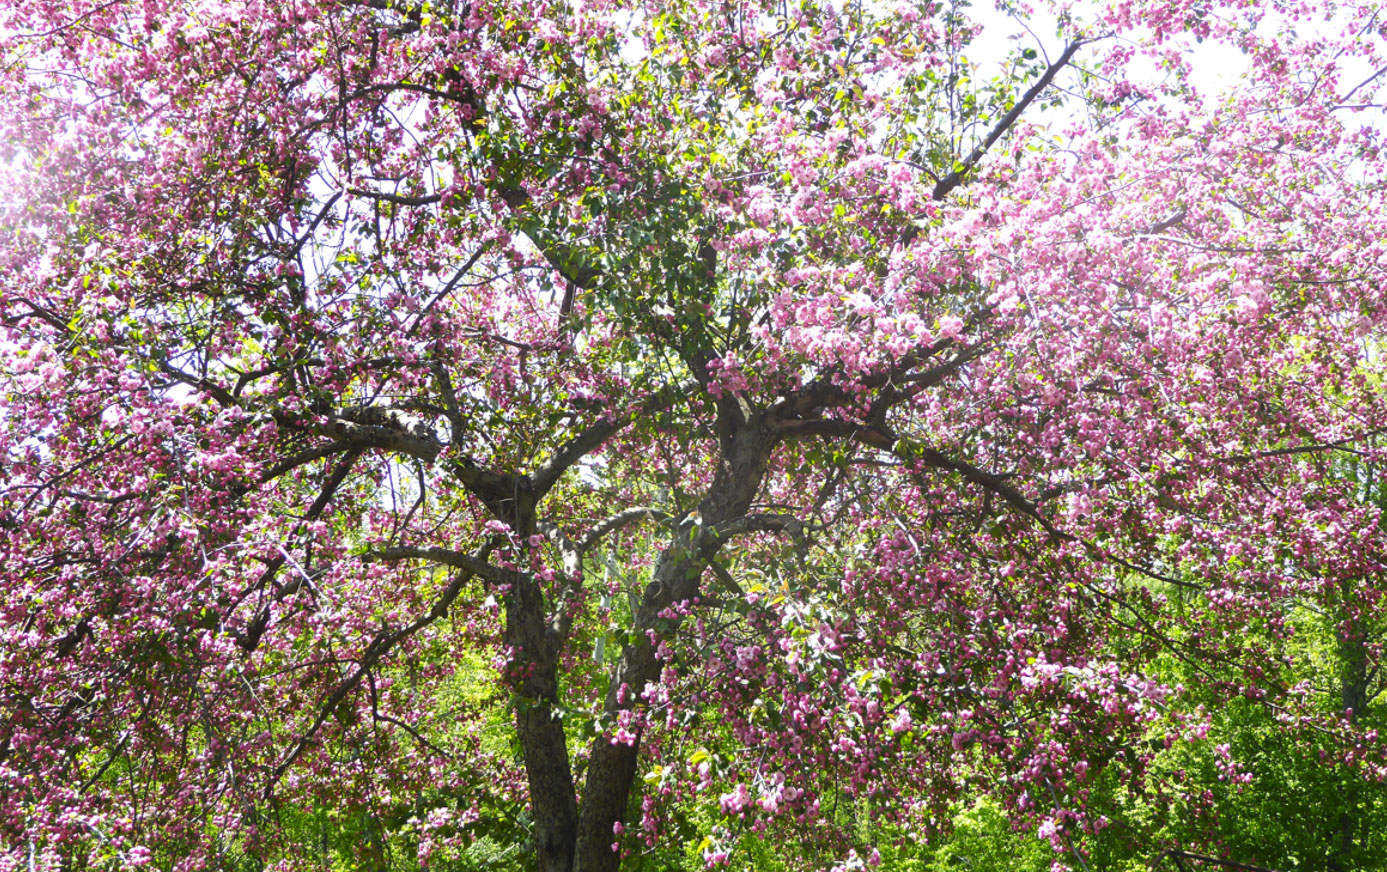 Blossoming crabapple trees